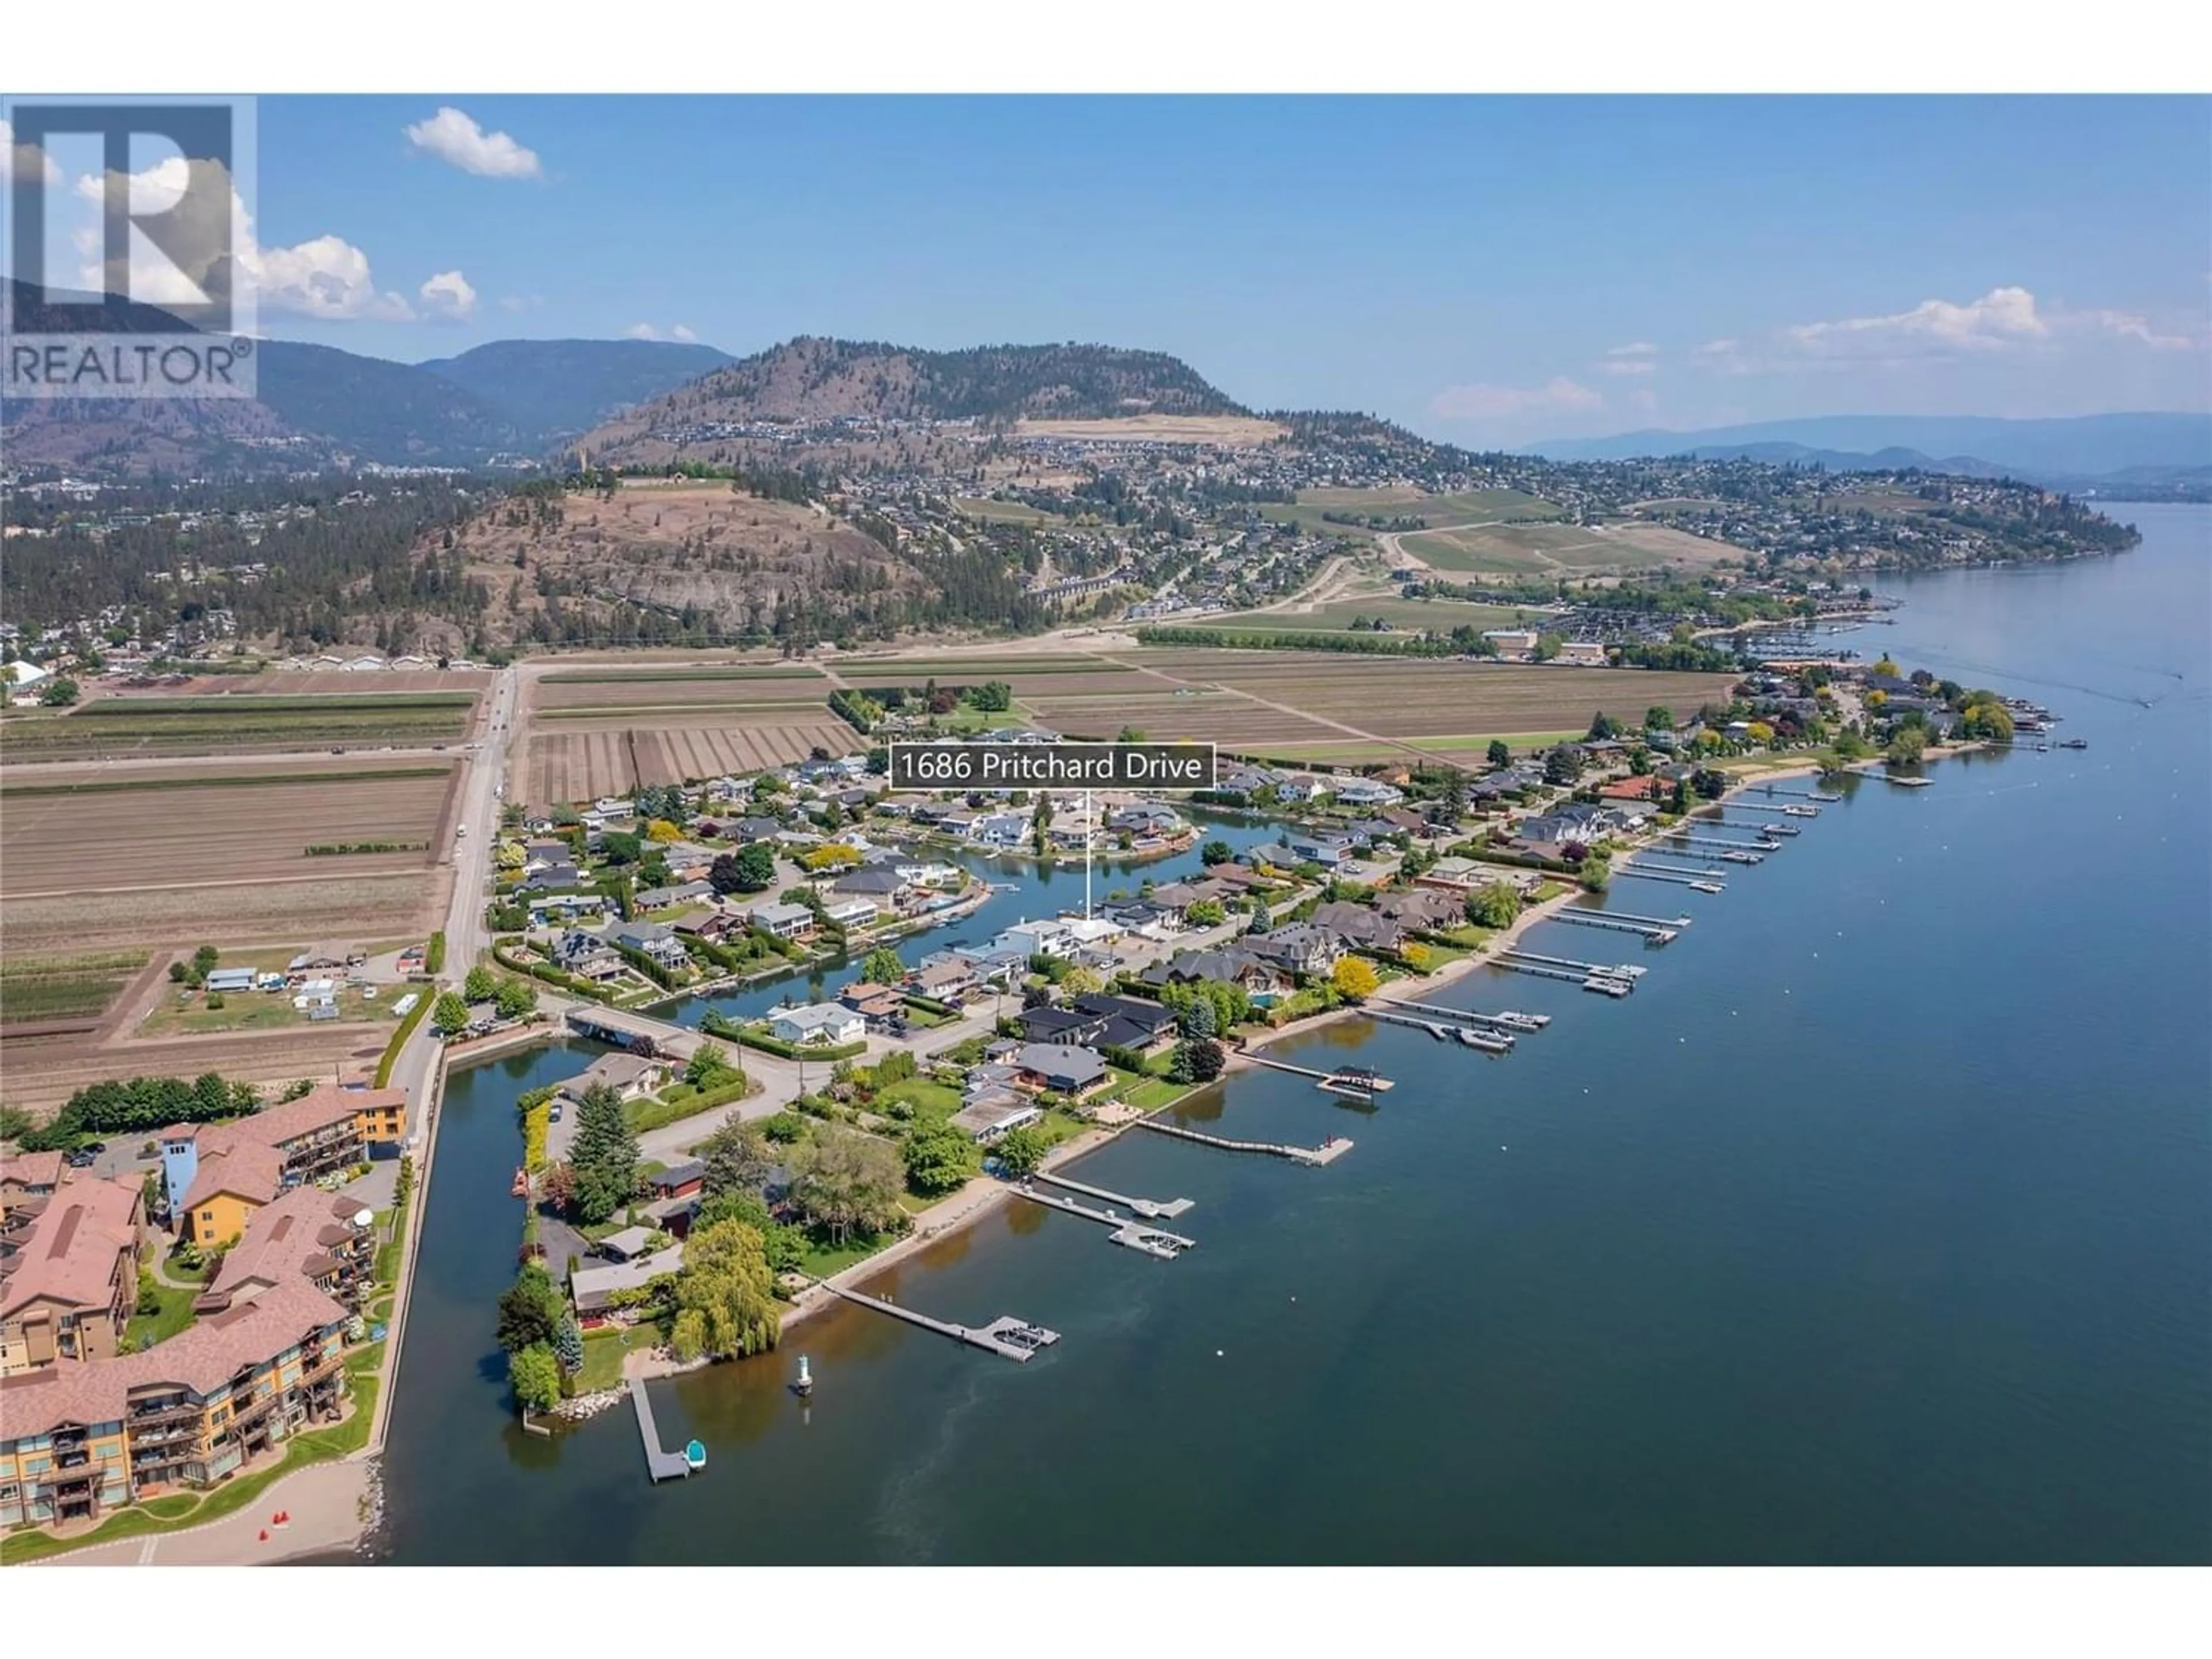 Lakeview for 1686 Pritchard Drive, West Kelowna British Columbia V4T1X5